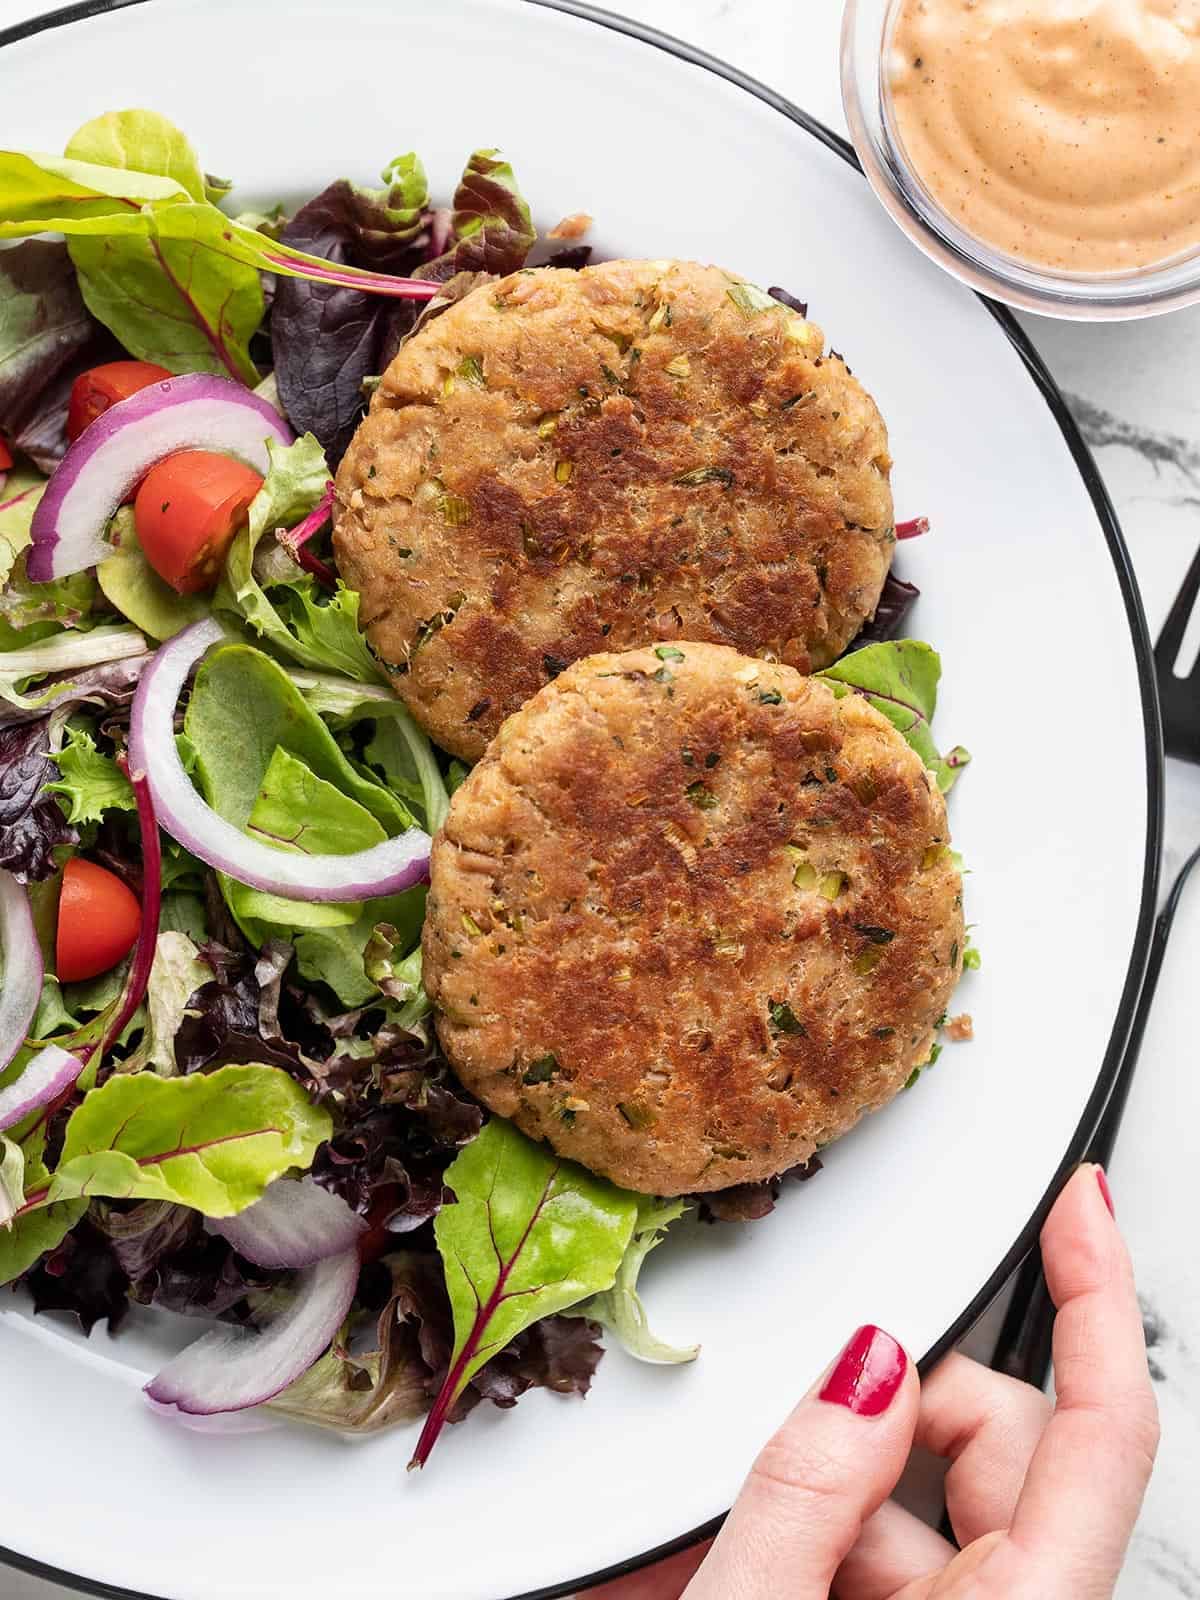 Two tuna patties on a plate with greens, a hand holding the side of the plate.